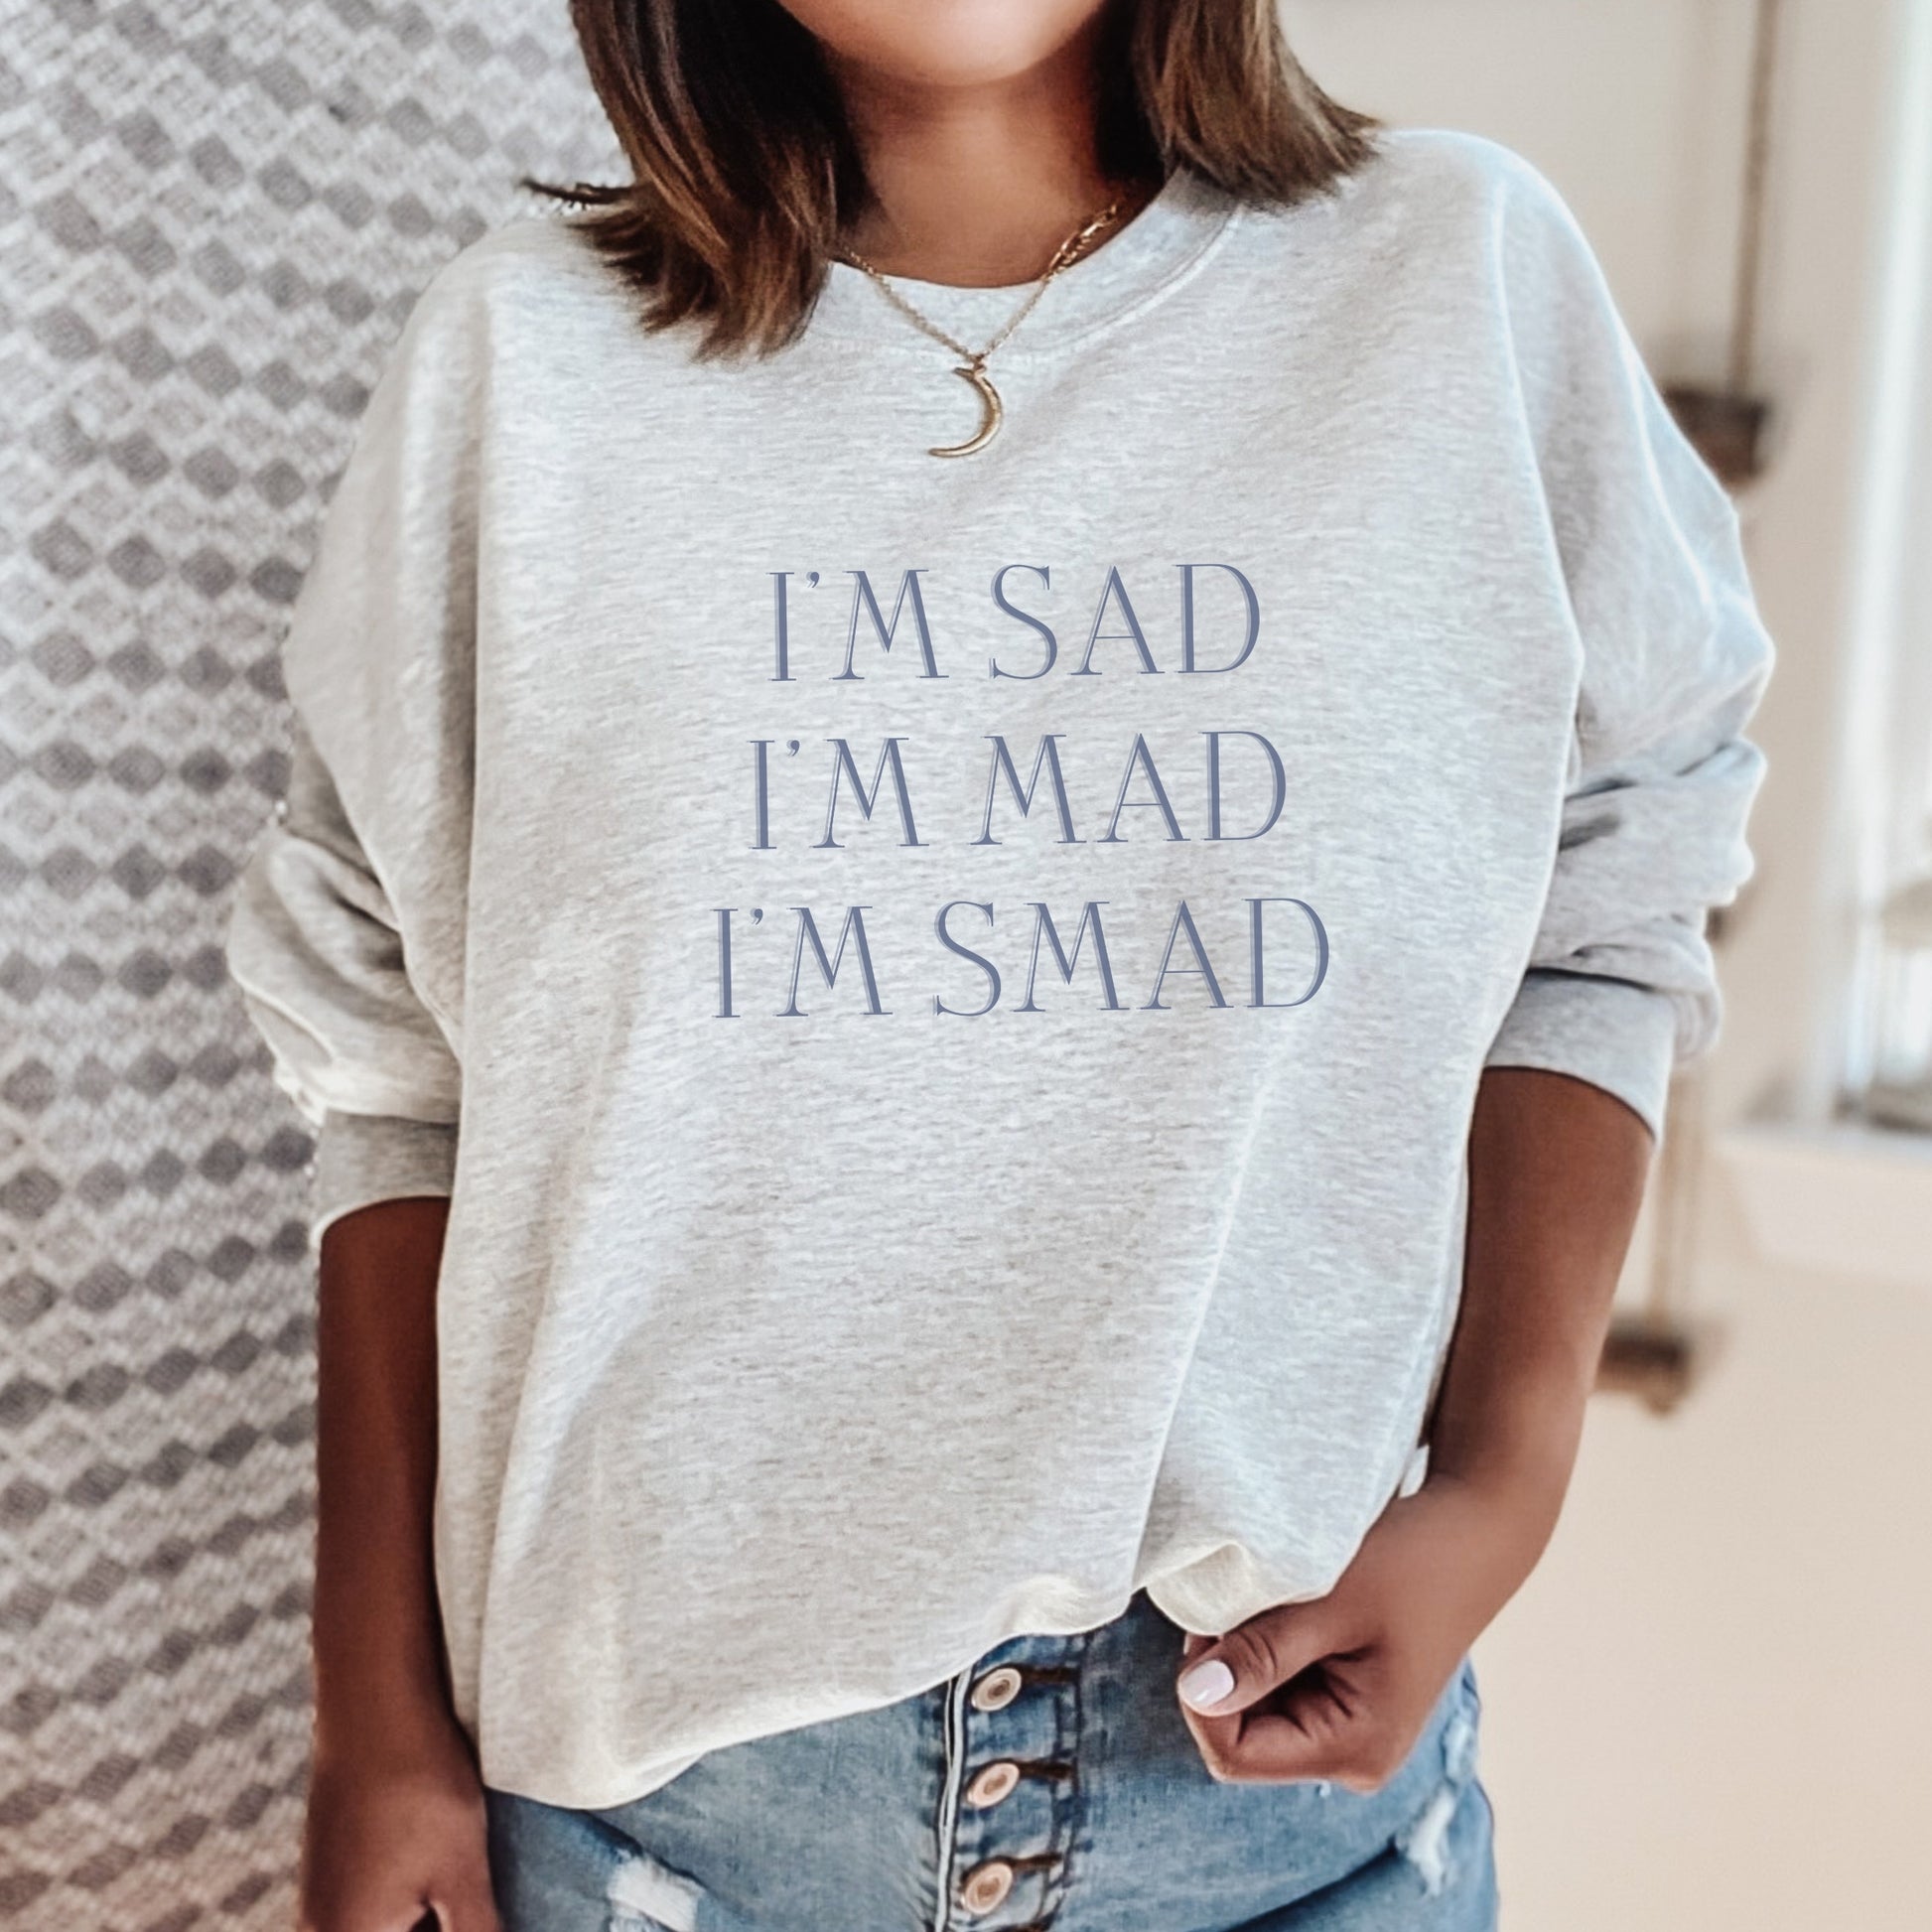 The front of the sweatshirt proudly displays the phrase "I’m Sad. I’m Mad. I’m Smad." in a bold and eye-catching font. The design is not just a fashion statement; it's a conversation starter that promotes mental health awareness and destigmatizes the spectrum of feelings we all experience.